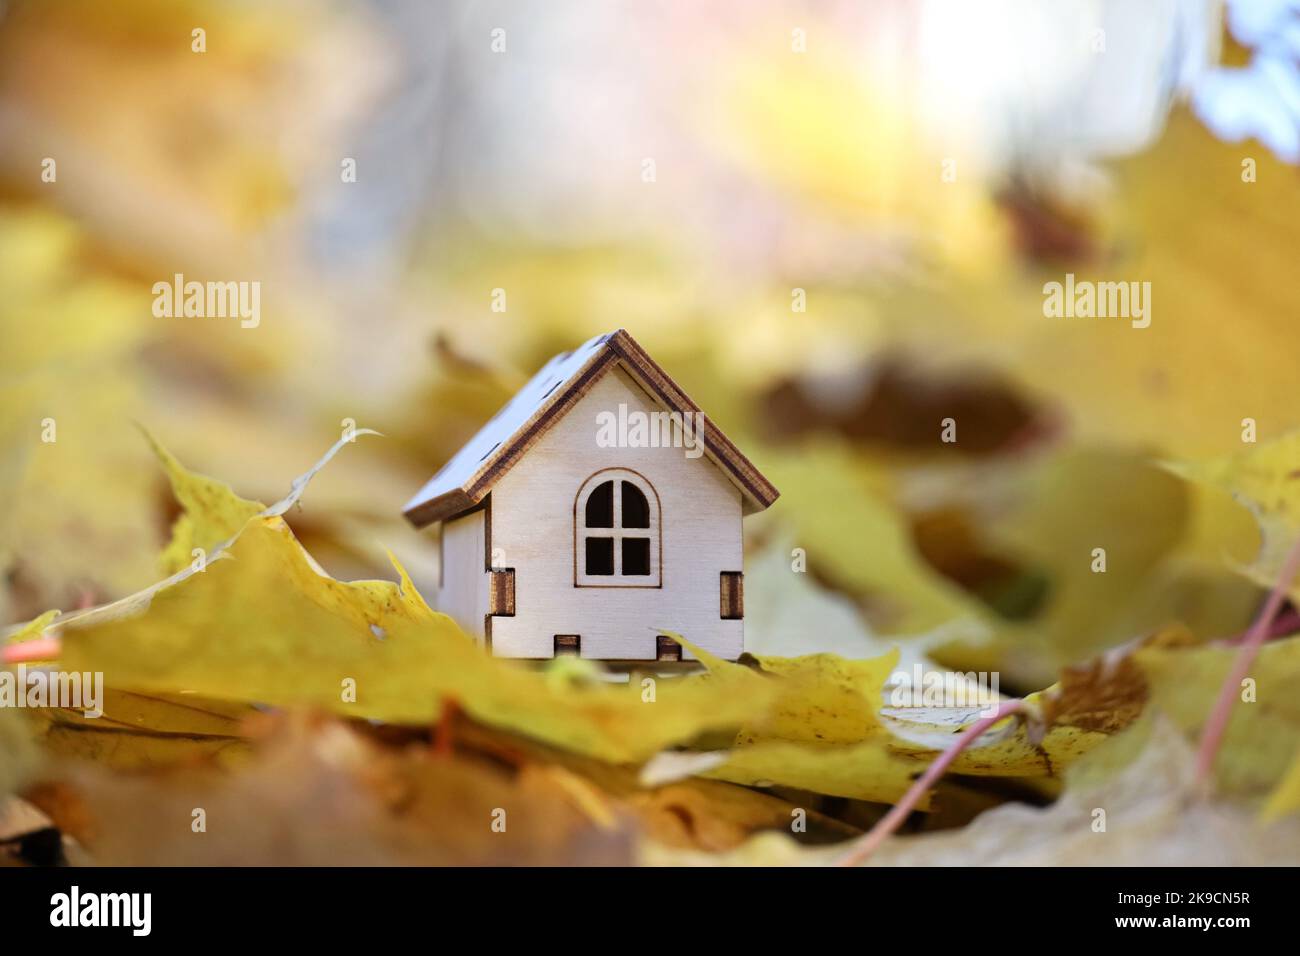 Small wooden house model on maple leaves background. Concept of country cottage, housing search in autumn, real estate in ecologically clean area Stock Photo